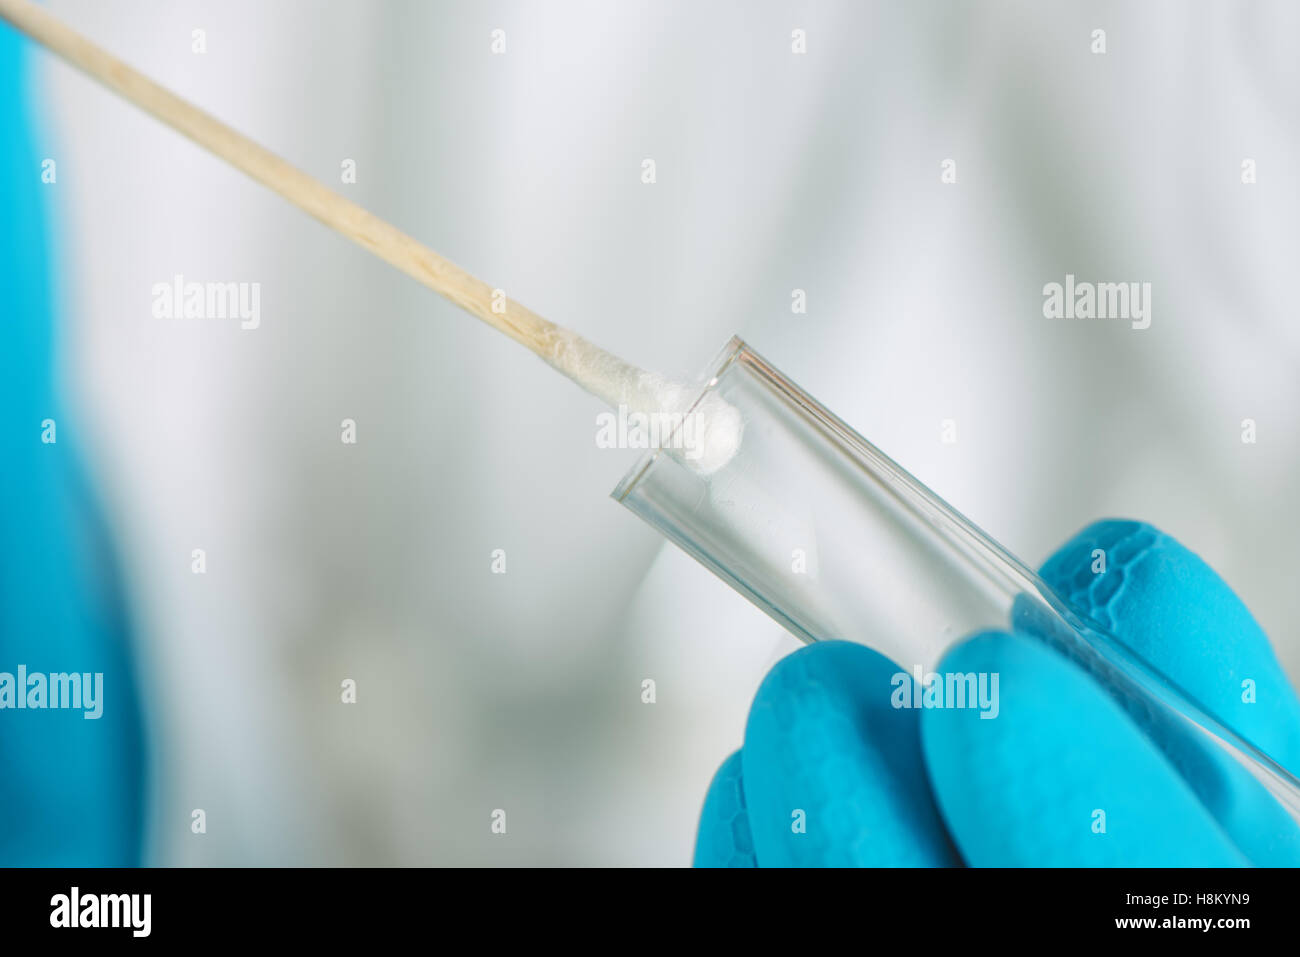 Cotton swab and DNA test tube, macro image of medical equipment in hands of healthcare professional Stock Photo